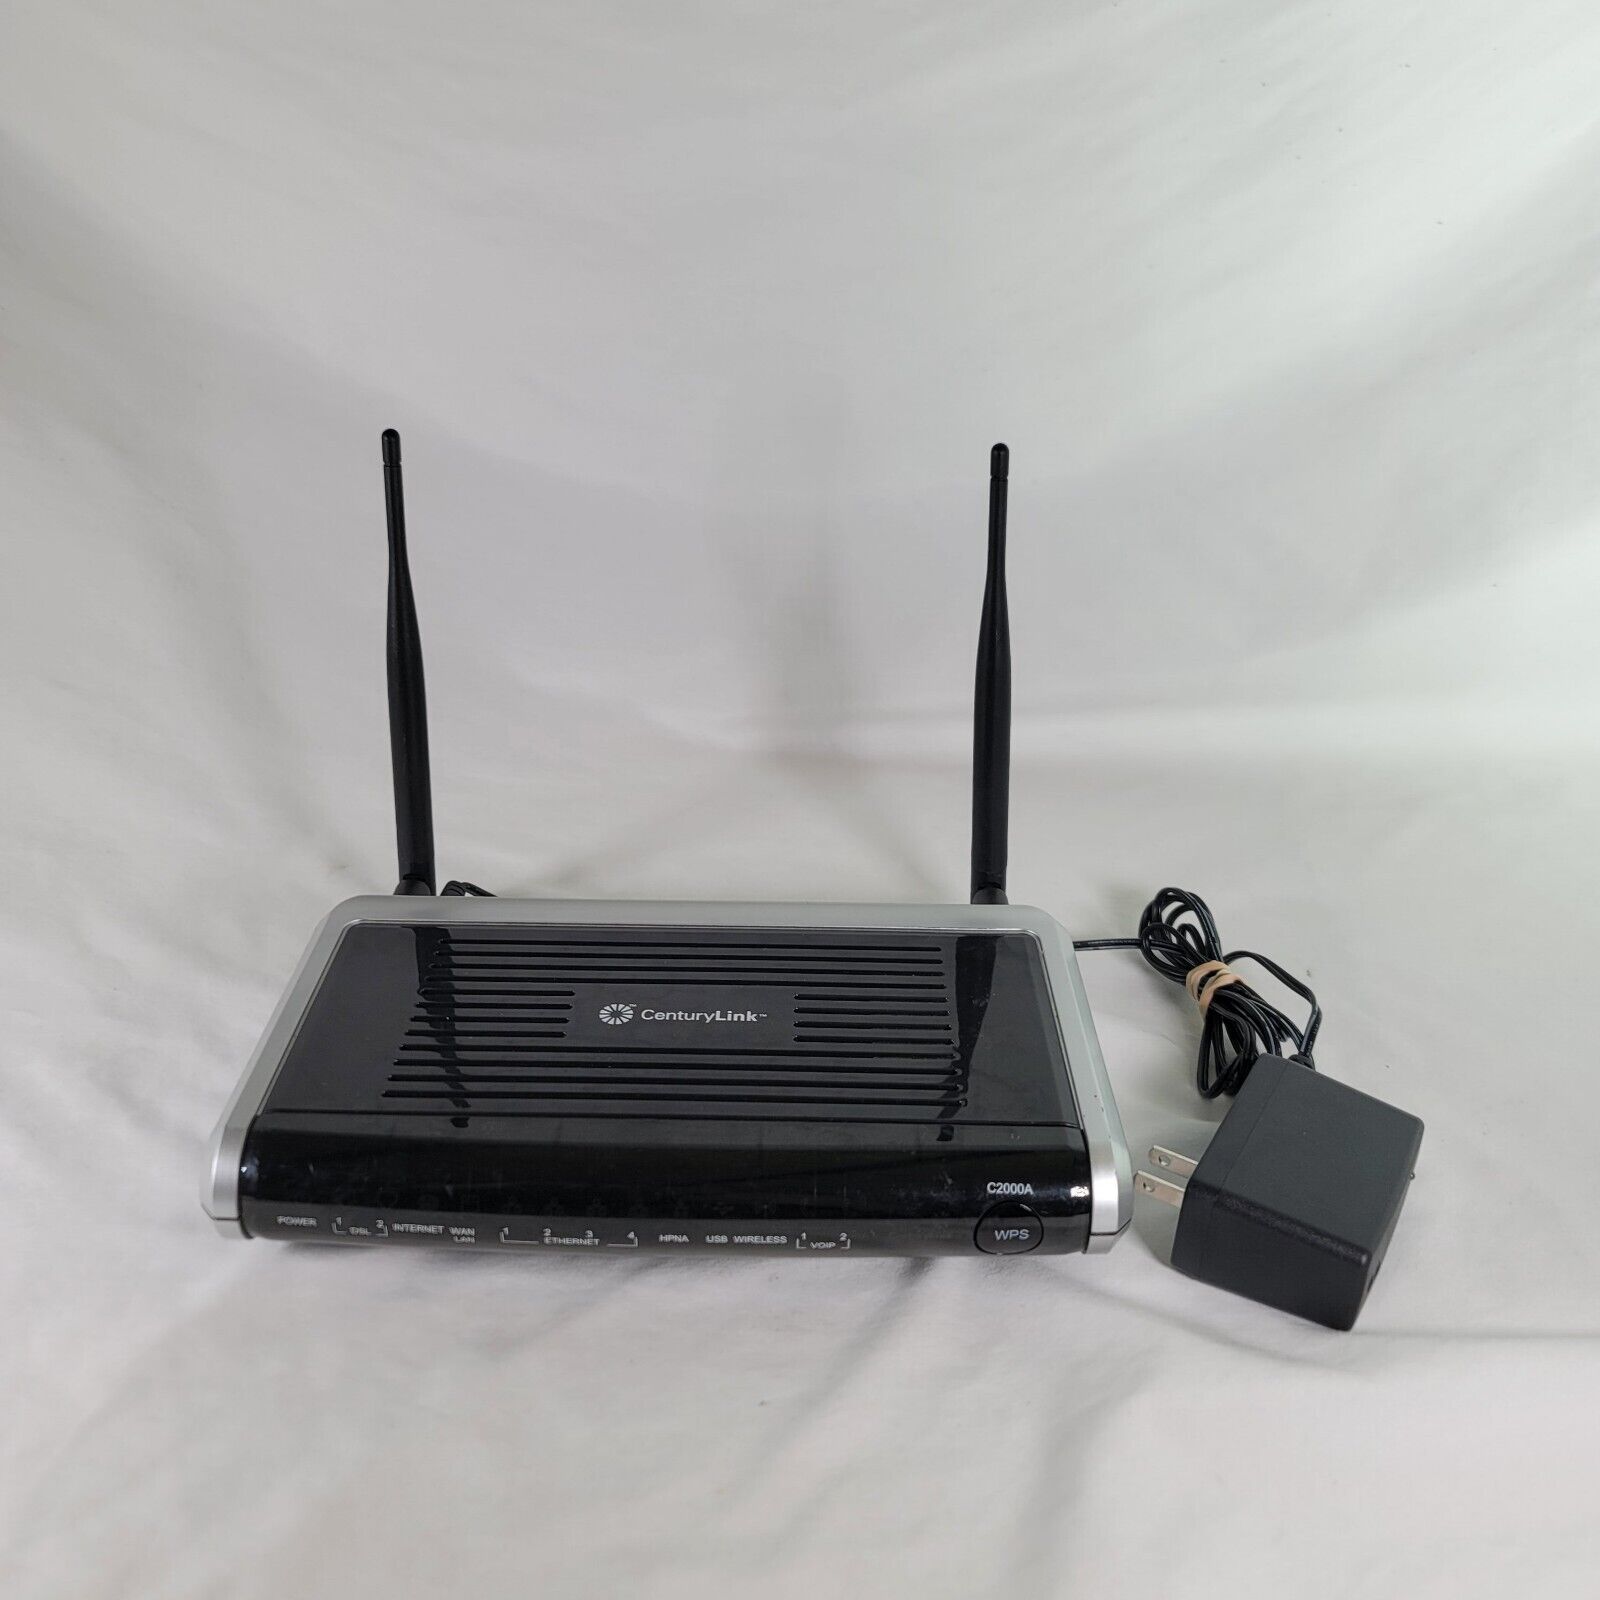 ActionTec CenturyLink Wireless Modem Router Model C2000A 802.11n Router NO CABLE